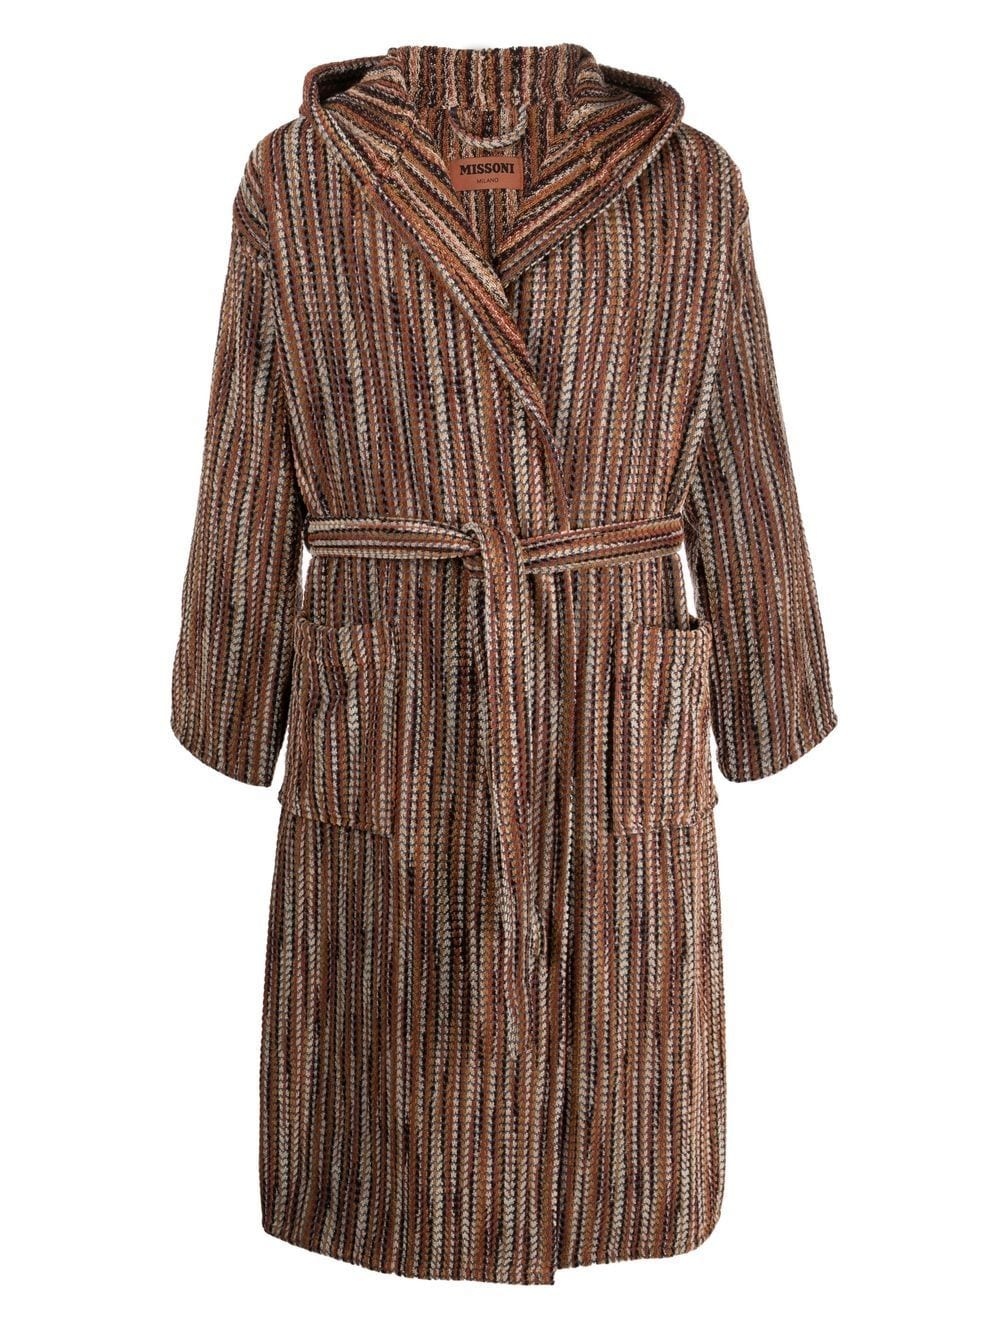 Billy patterned towelling robe - 1